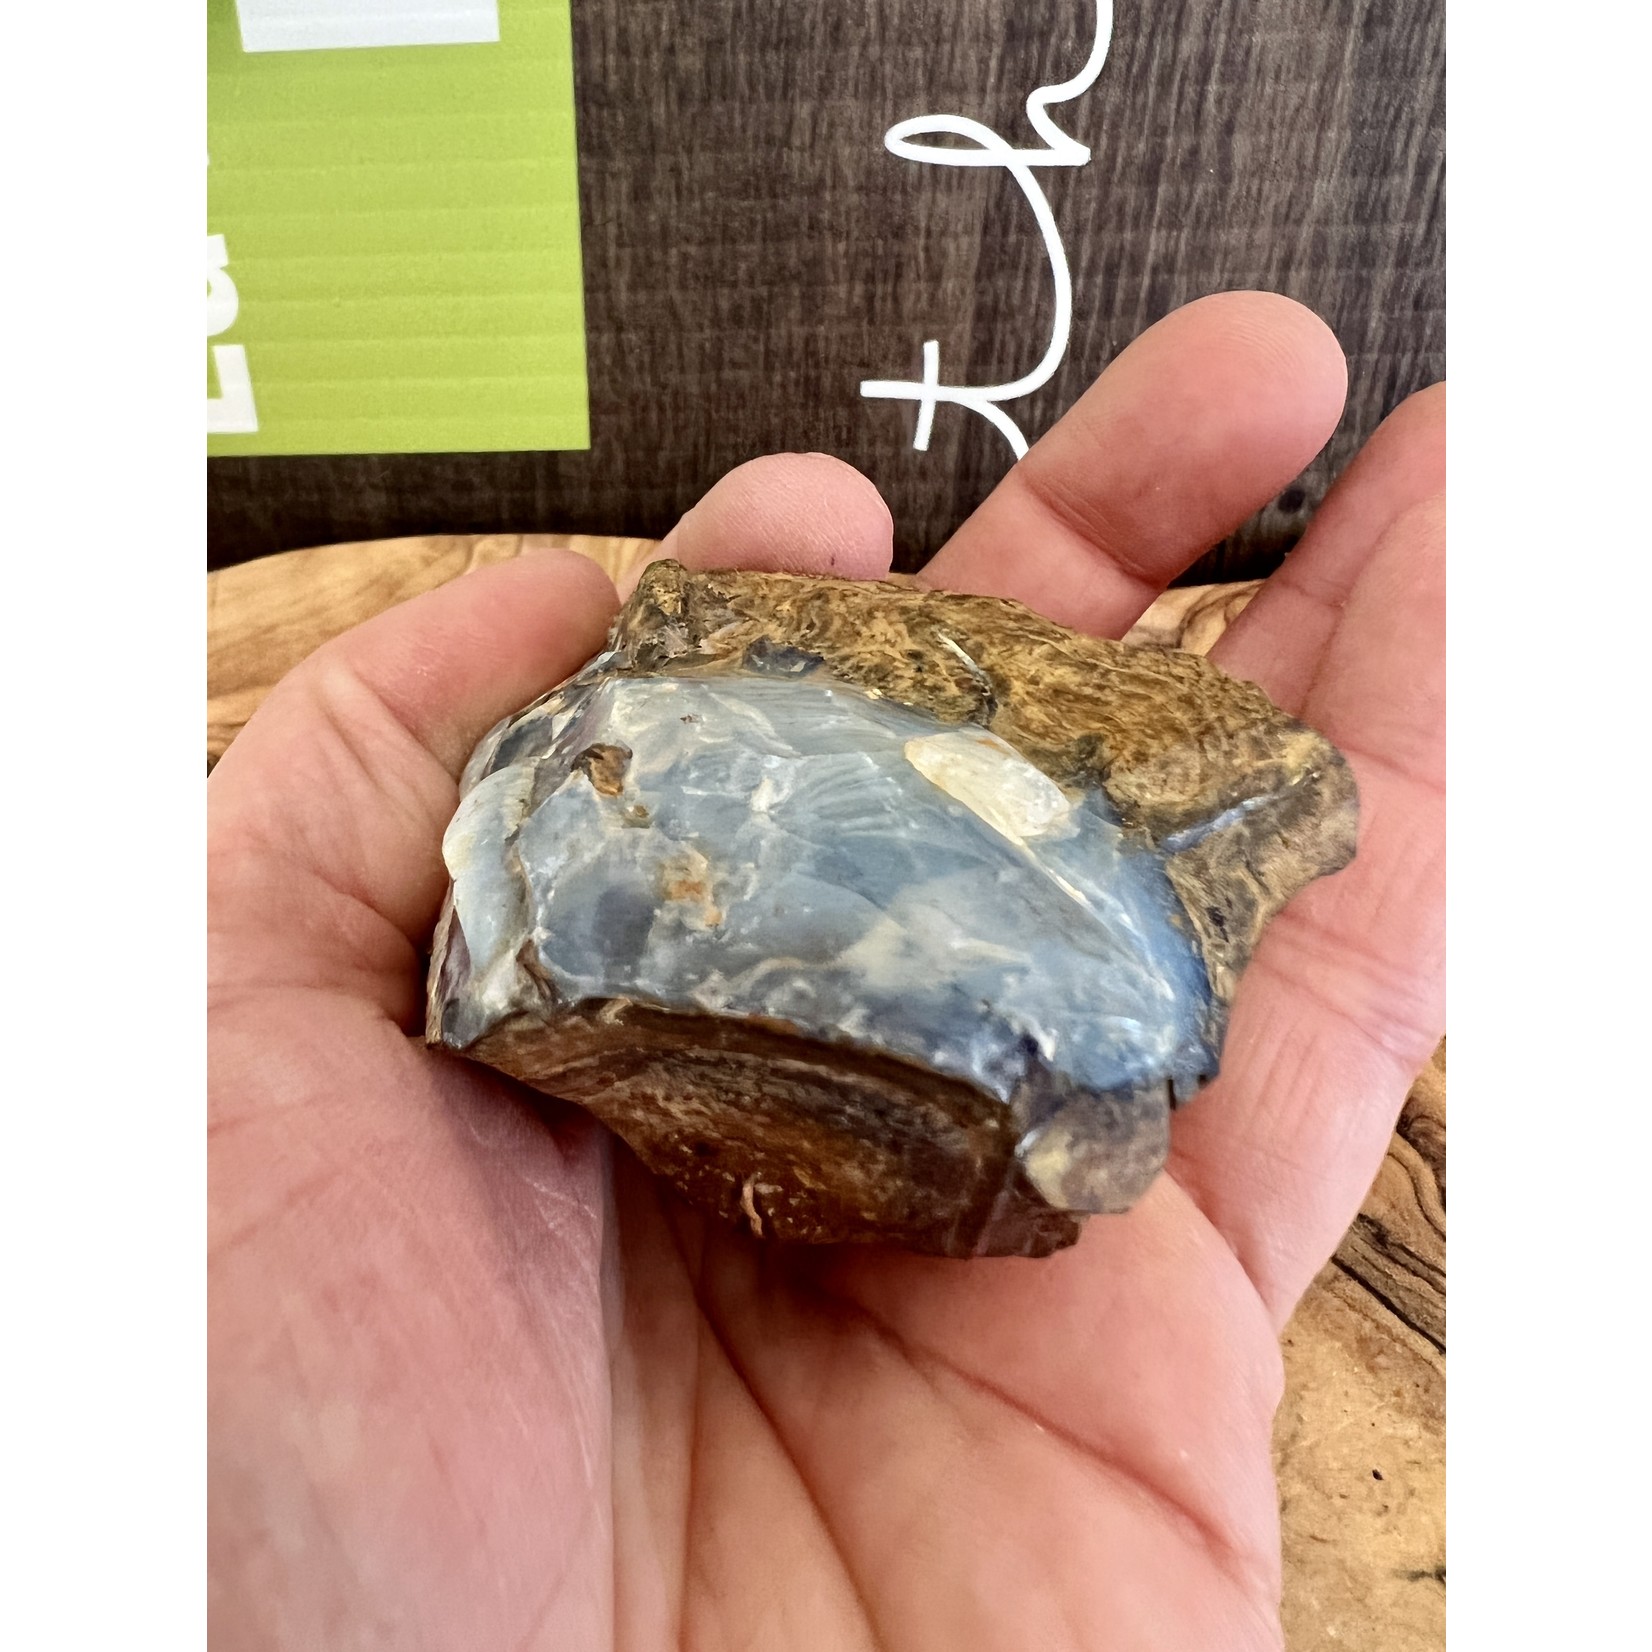 Premium Australian Boulder Opal- Boosts Self-Confidence, Soothes Mood and Improves Circulation